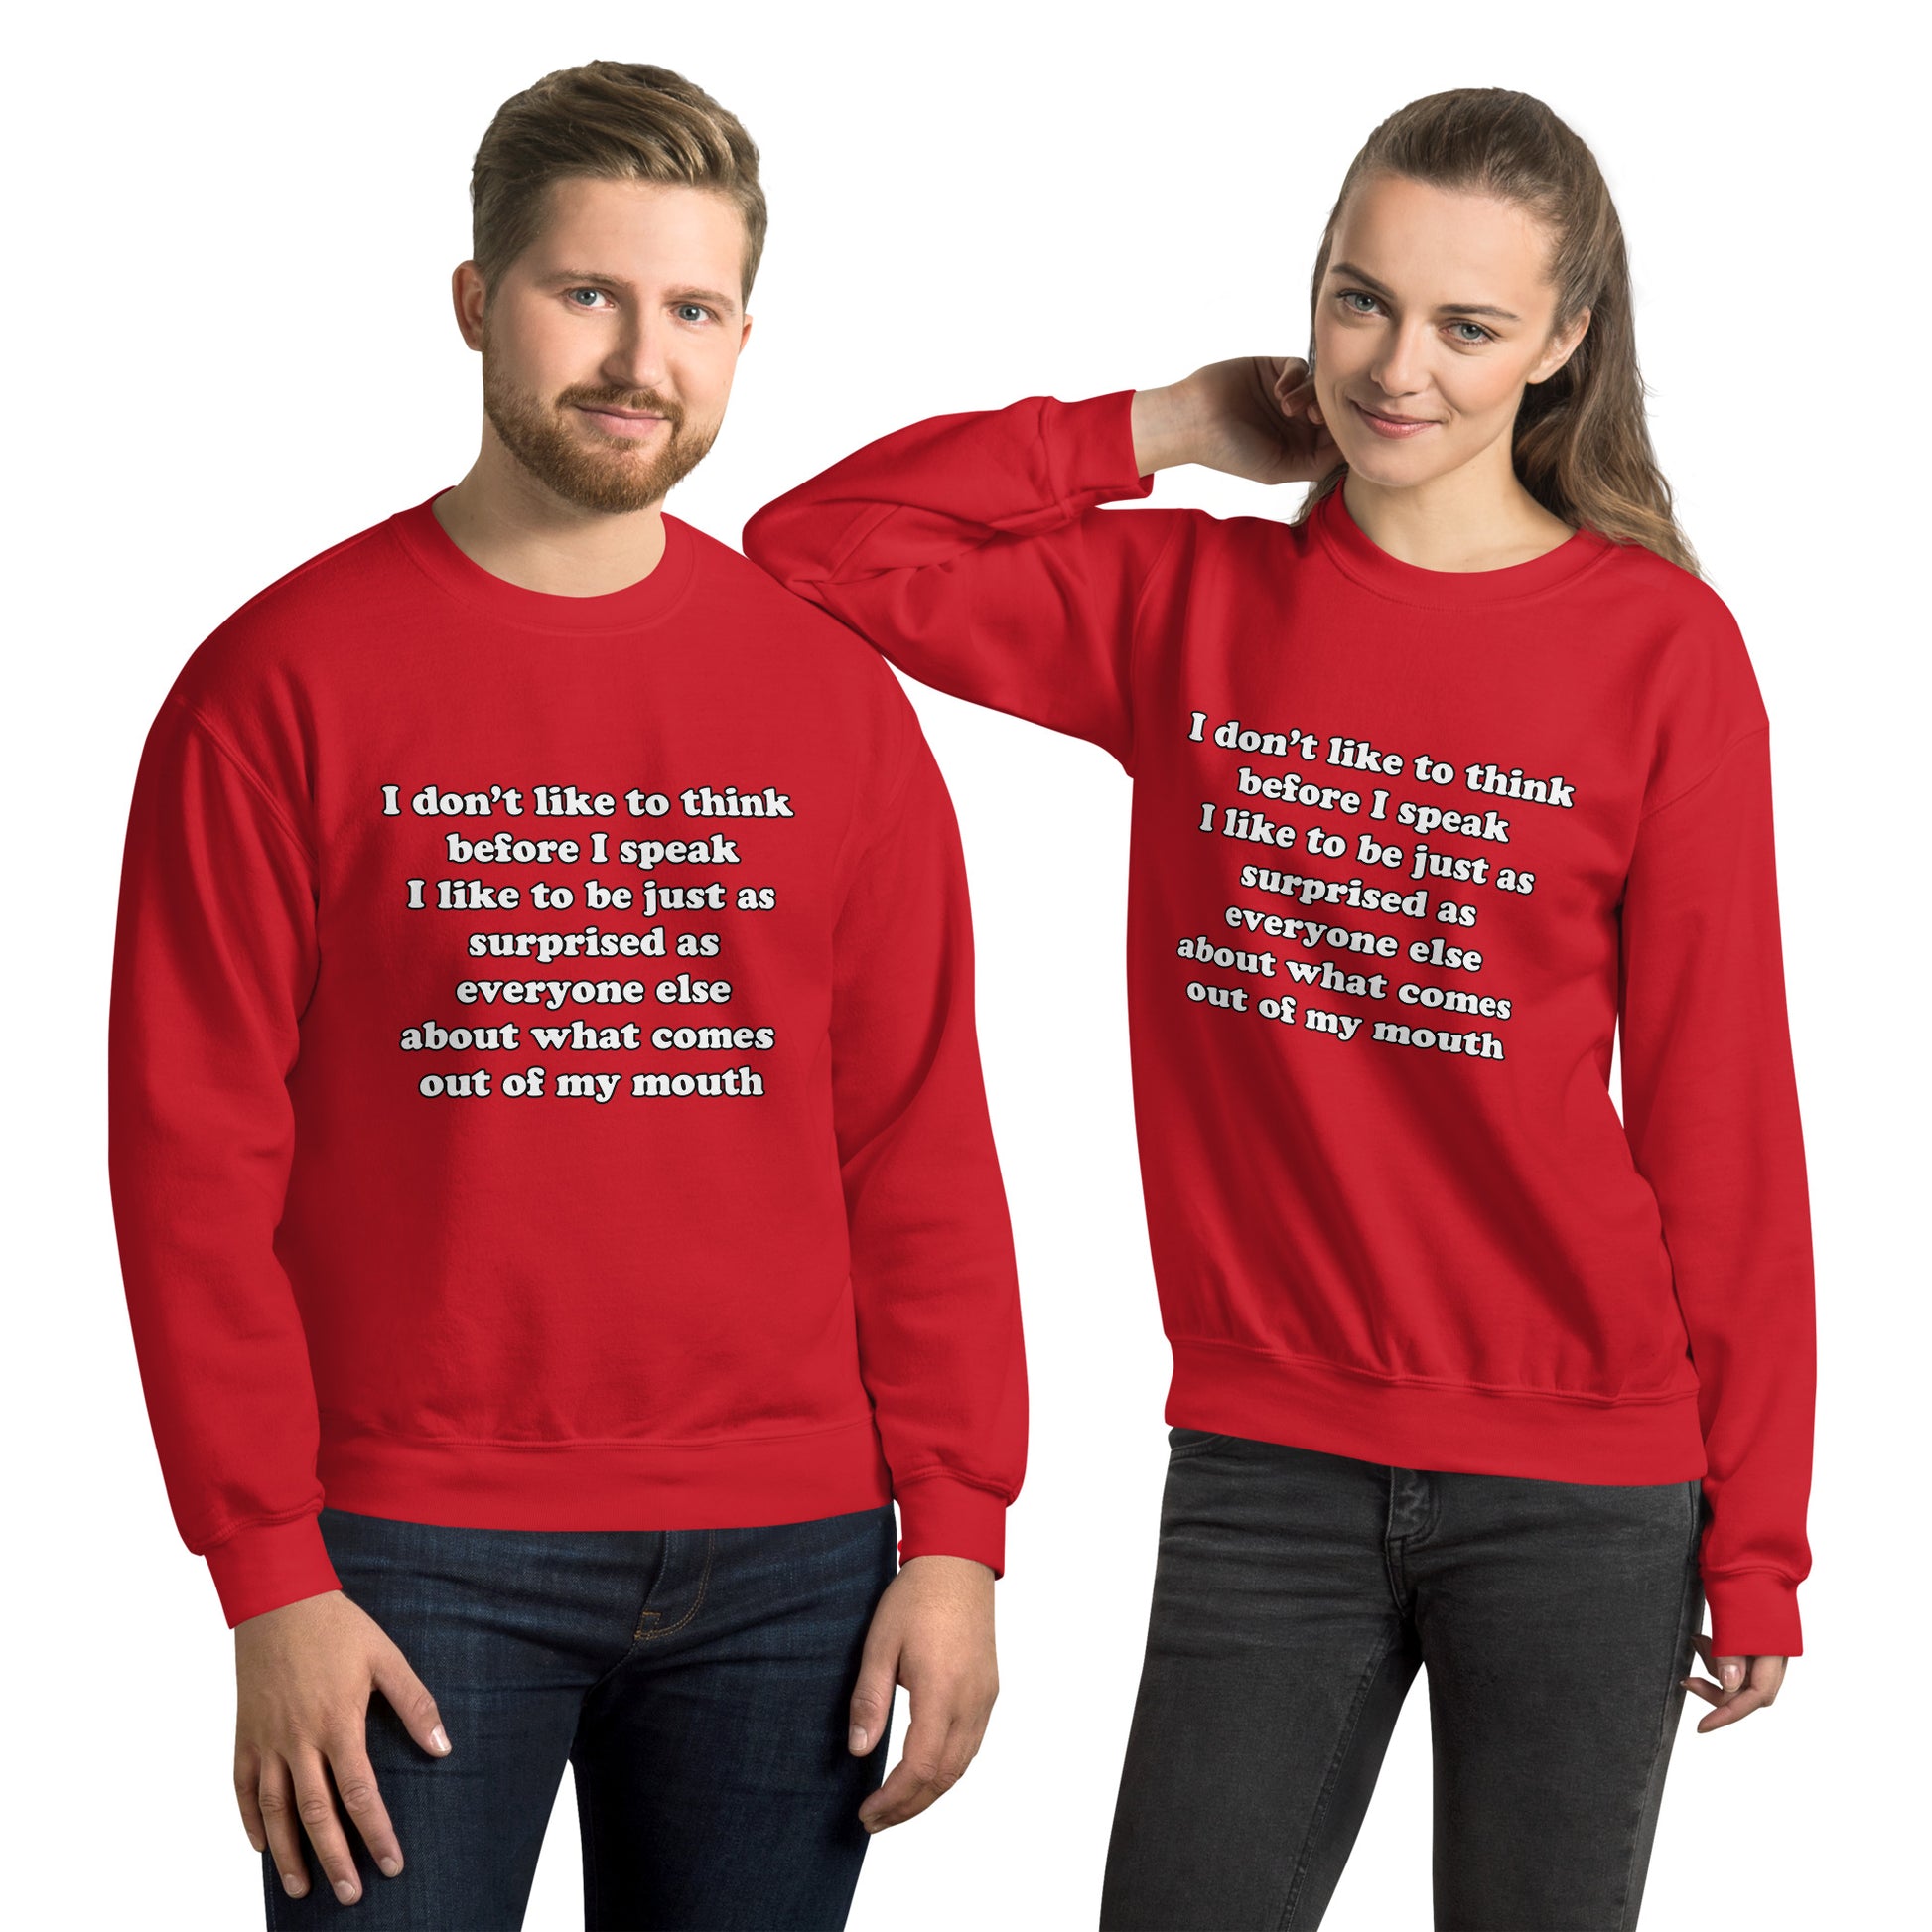 Man and woman with red sweatshirt with text “I don't think before I speak Just as serprised as everyone about what comes out of my mouth"